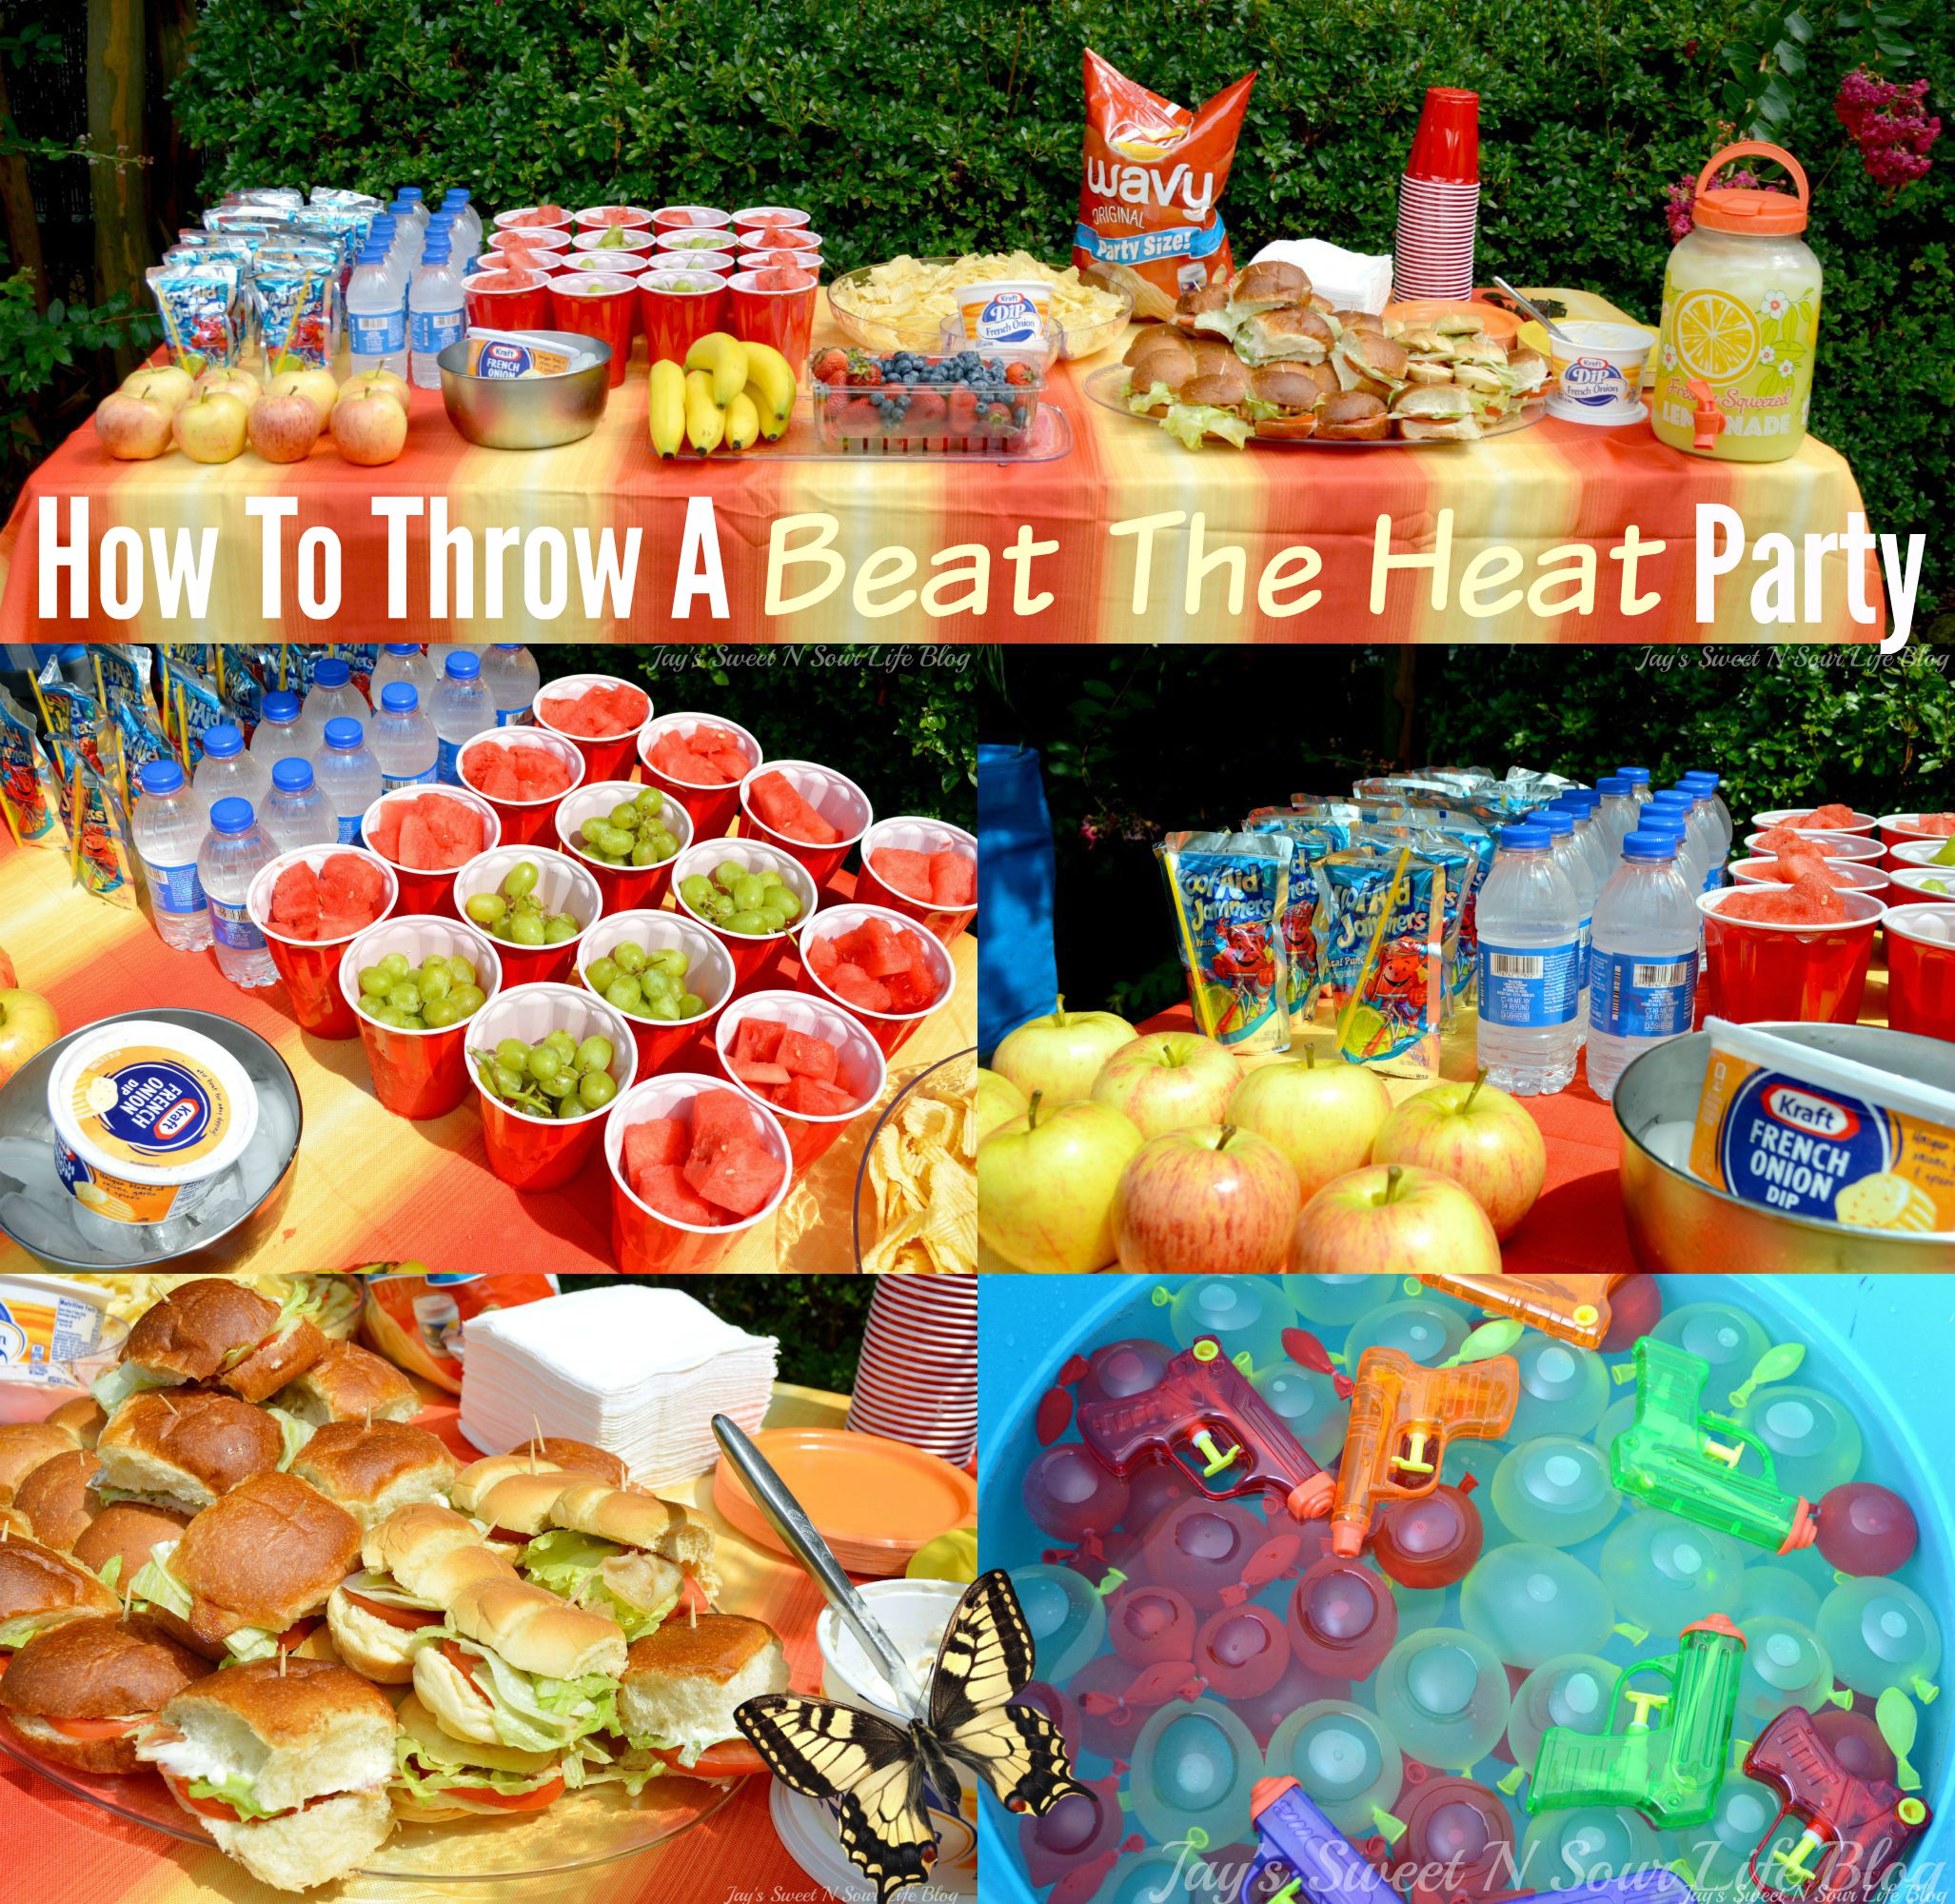 How To Throw A ‘Beat The Heat’ Party